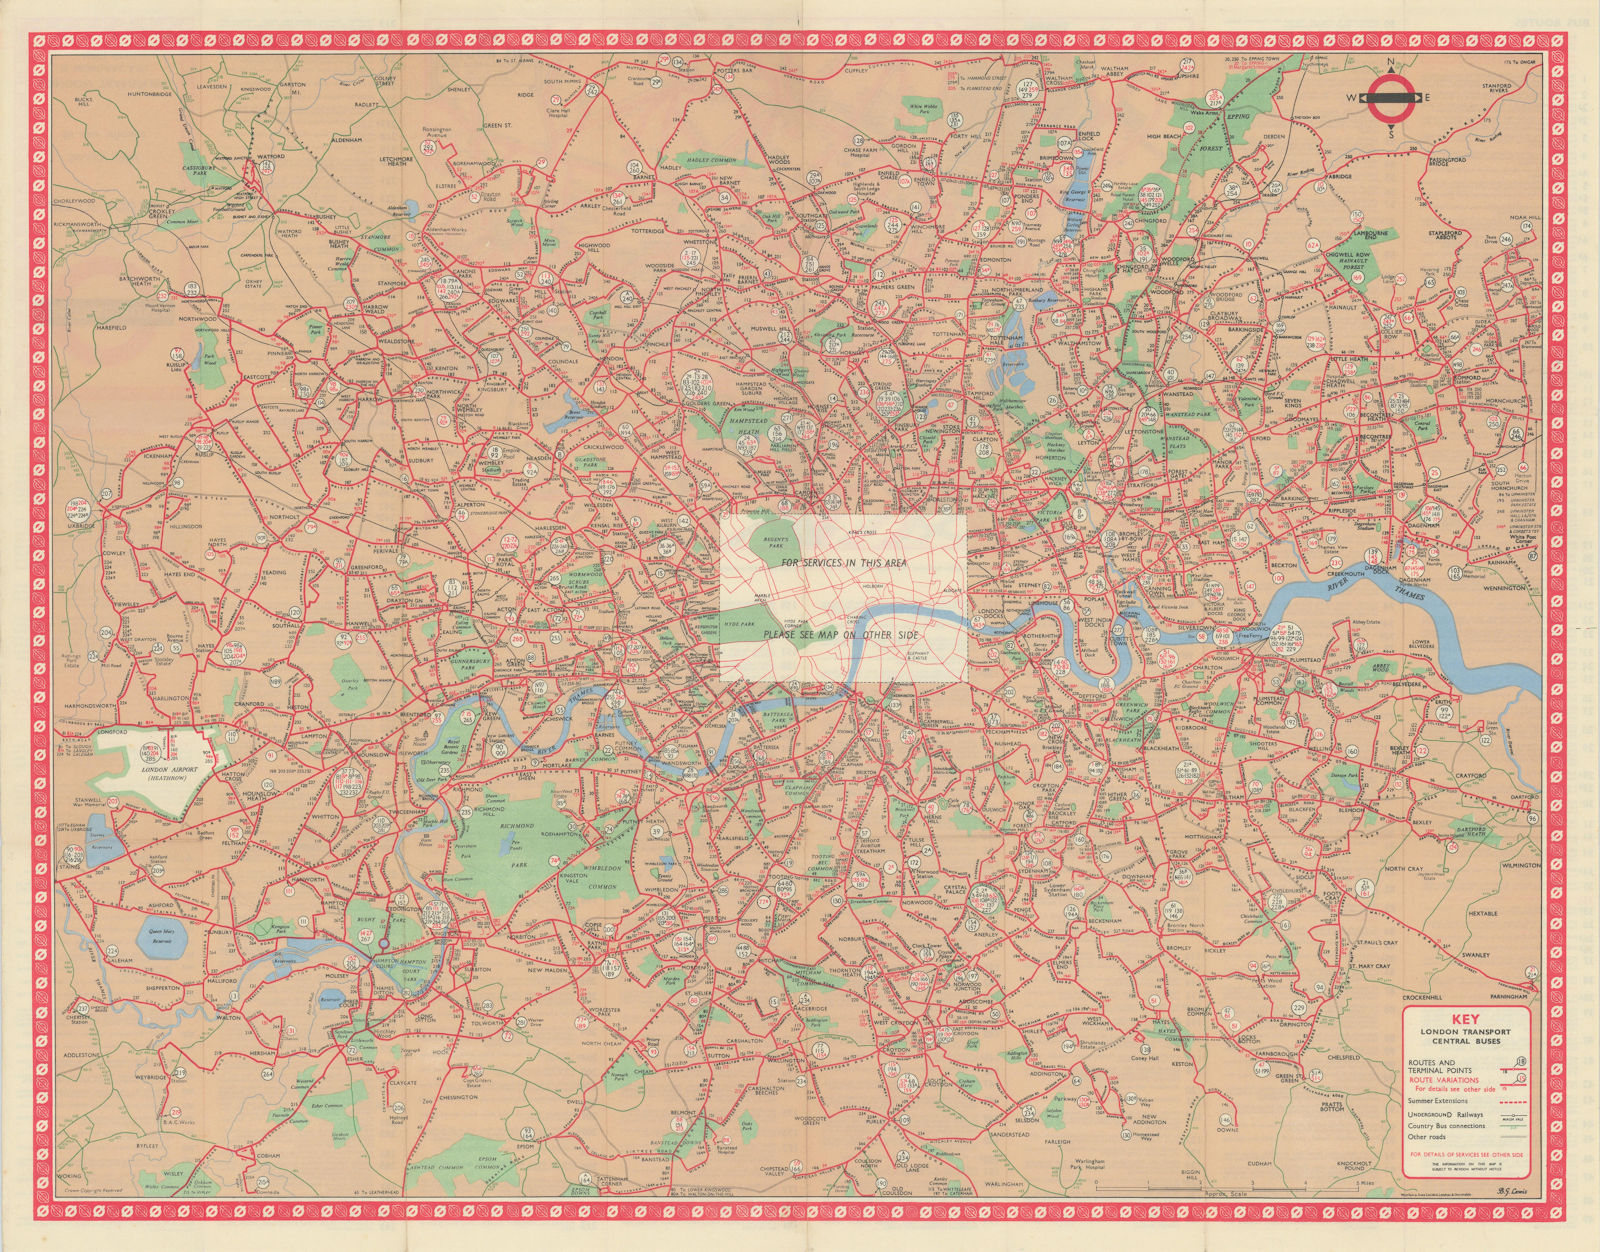 London Transport Central Buses map and list of routes. LEWIS #3 1964 old